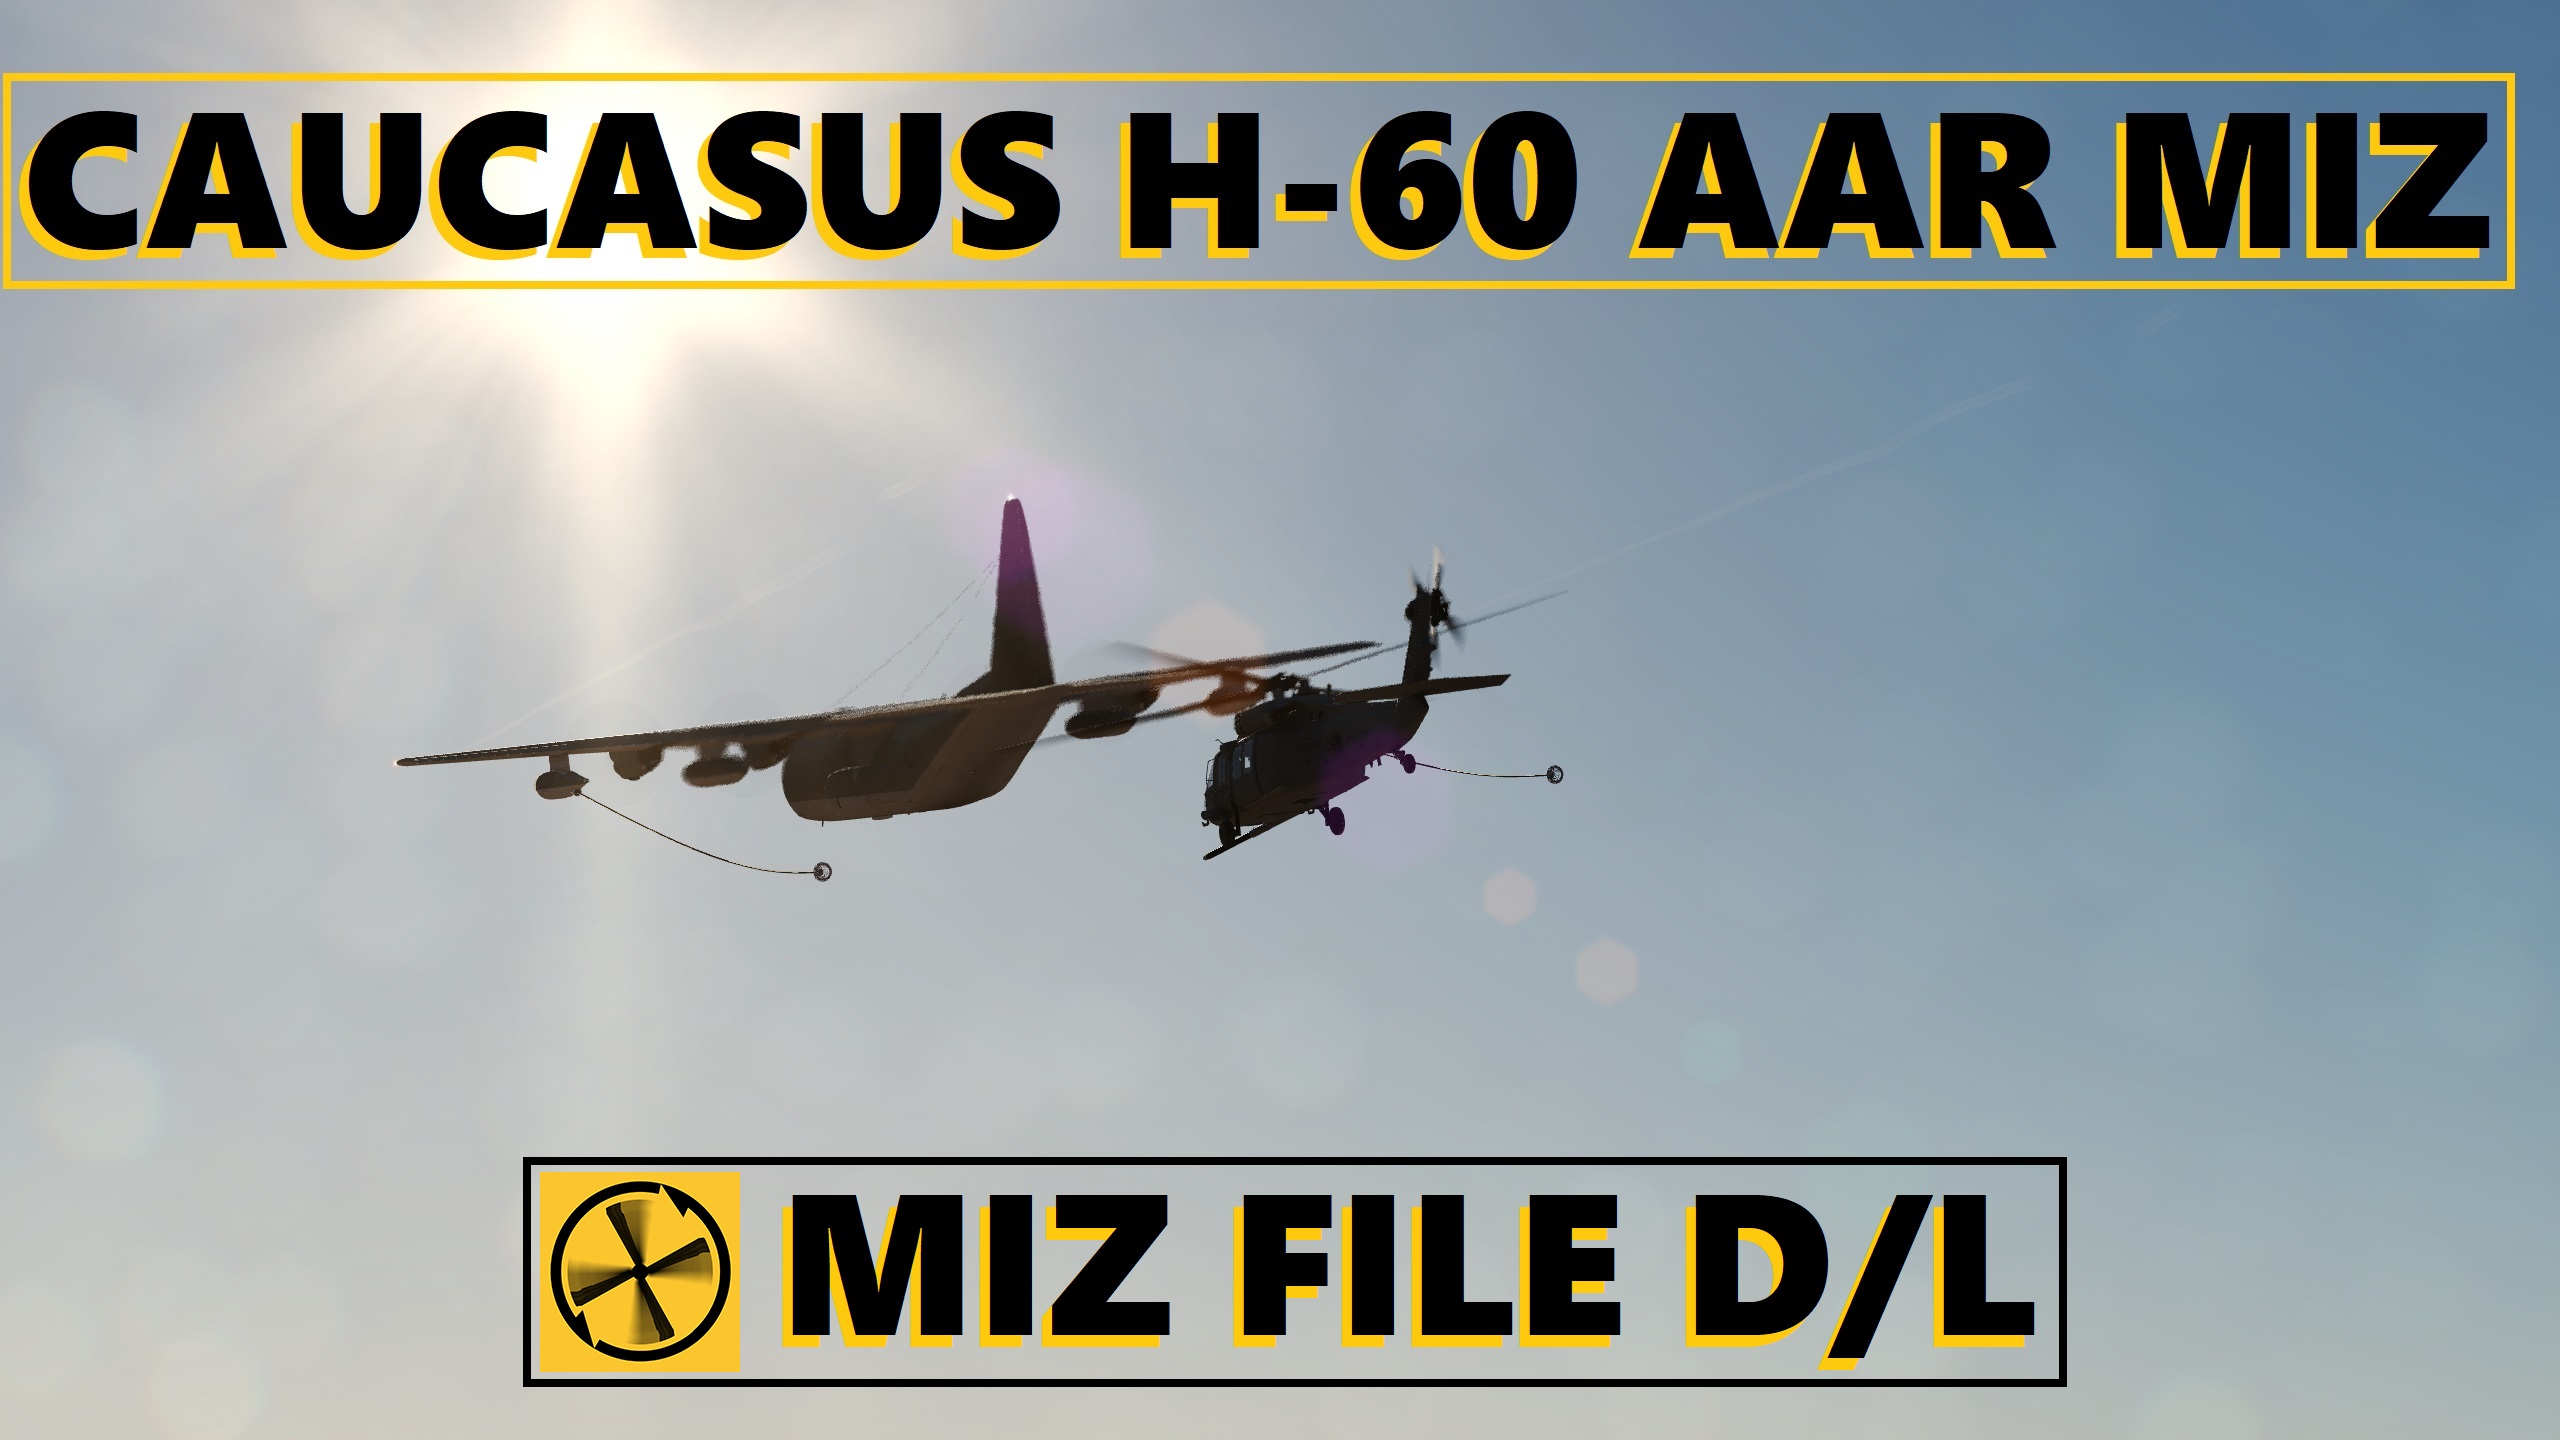 UPDATED - 10March2022 - DCS H-60L Blackhawk Project - Simple Multiplayer HH-60G Skin AAR Mission with KC-130 on Caucasus Map.